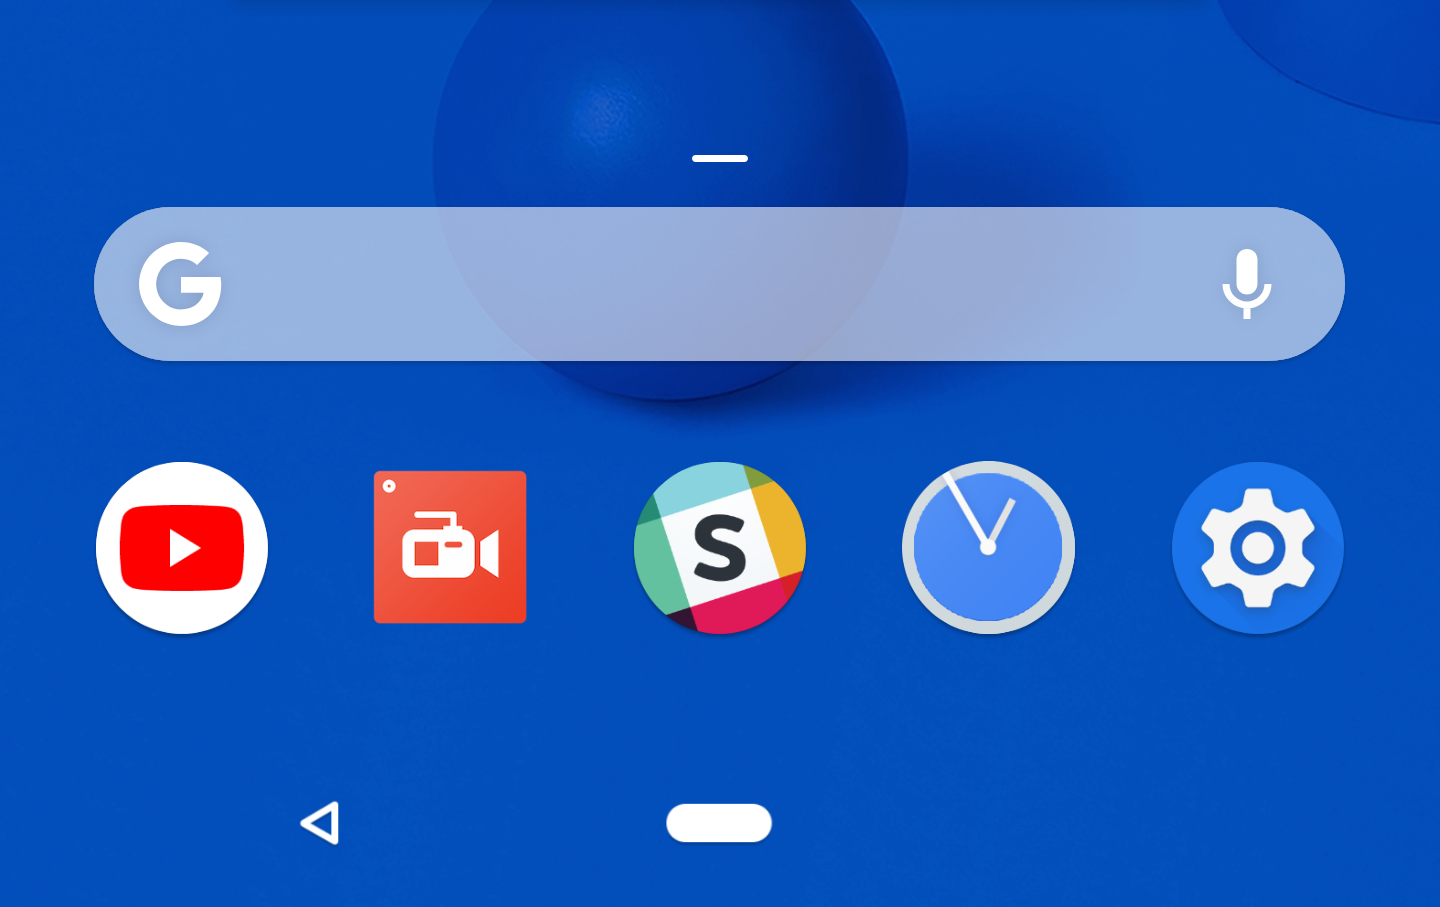 Android navigation buttons. Readline Android. Pixel nav button. Navigation buttons. Включи моментальную